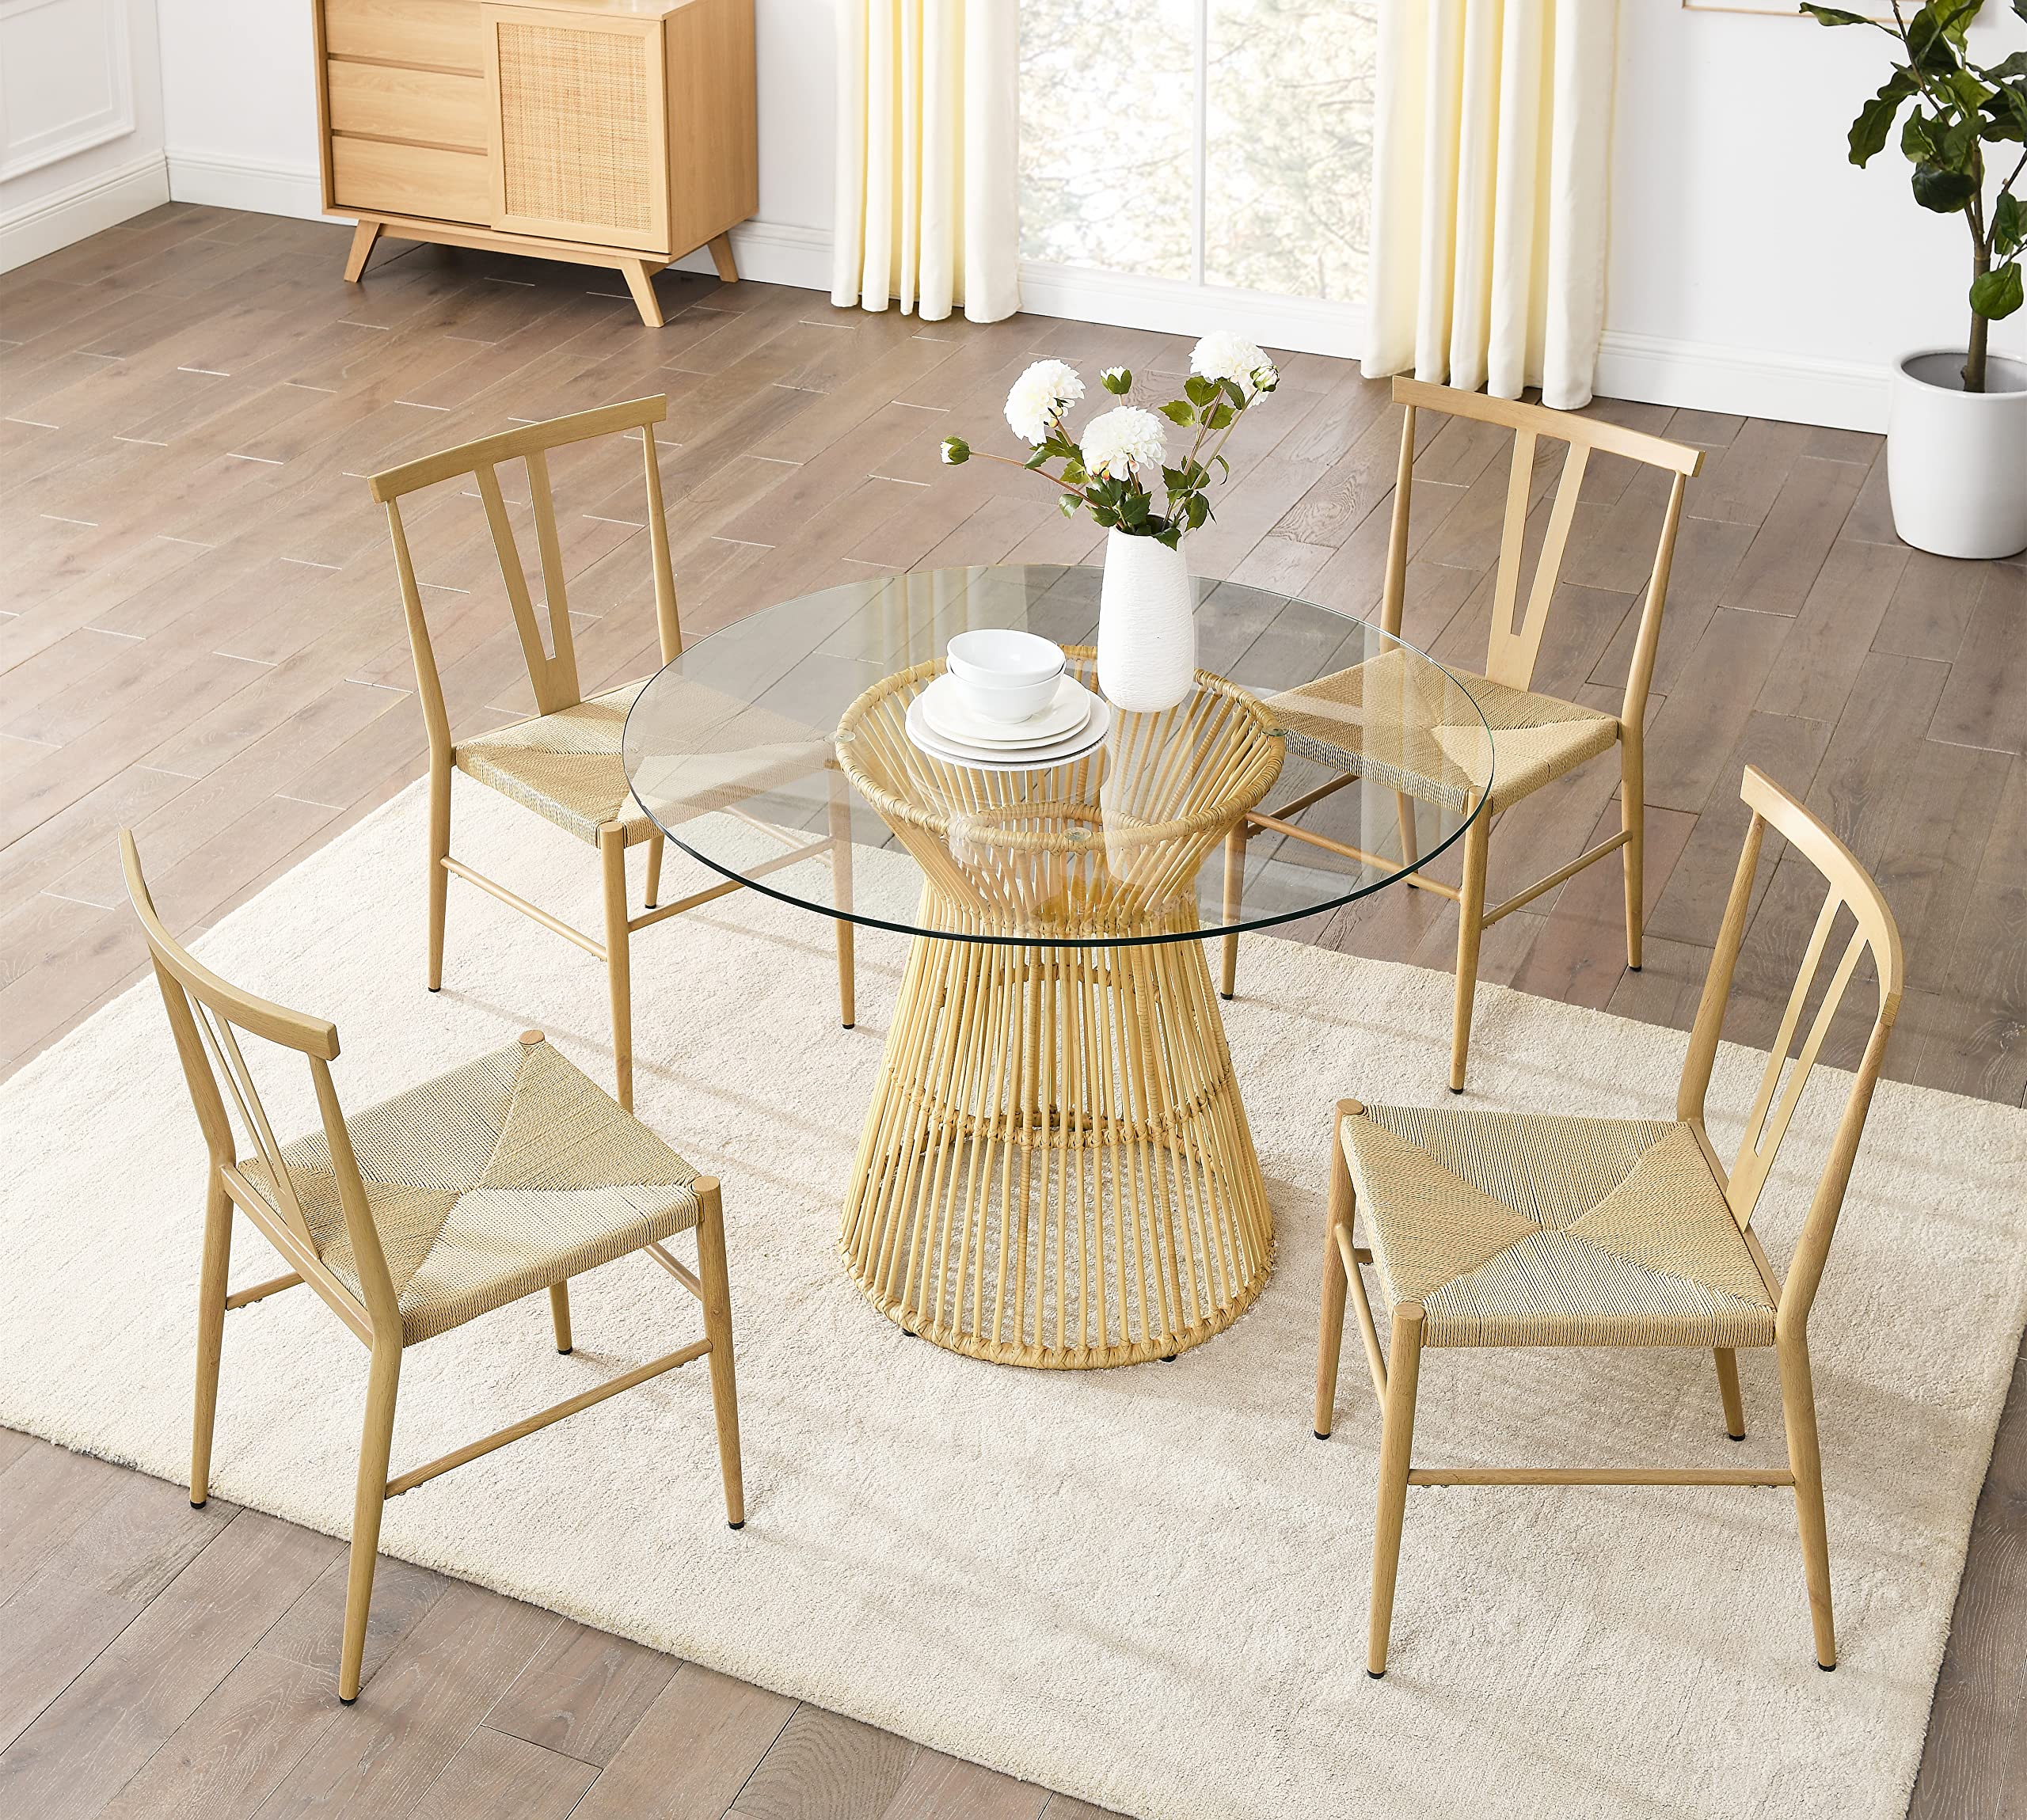 Melpomene 5 Pieces Rattan Wicker Dining Table Set with 44" Round Table Glass Top and Four Chairs,for Kitchen, Living Room and Dining Room